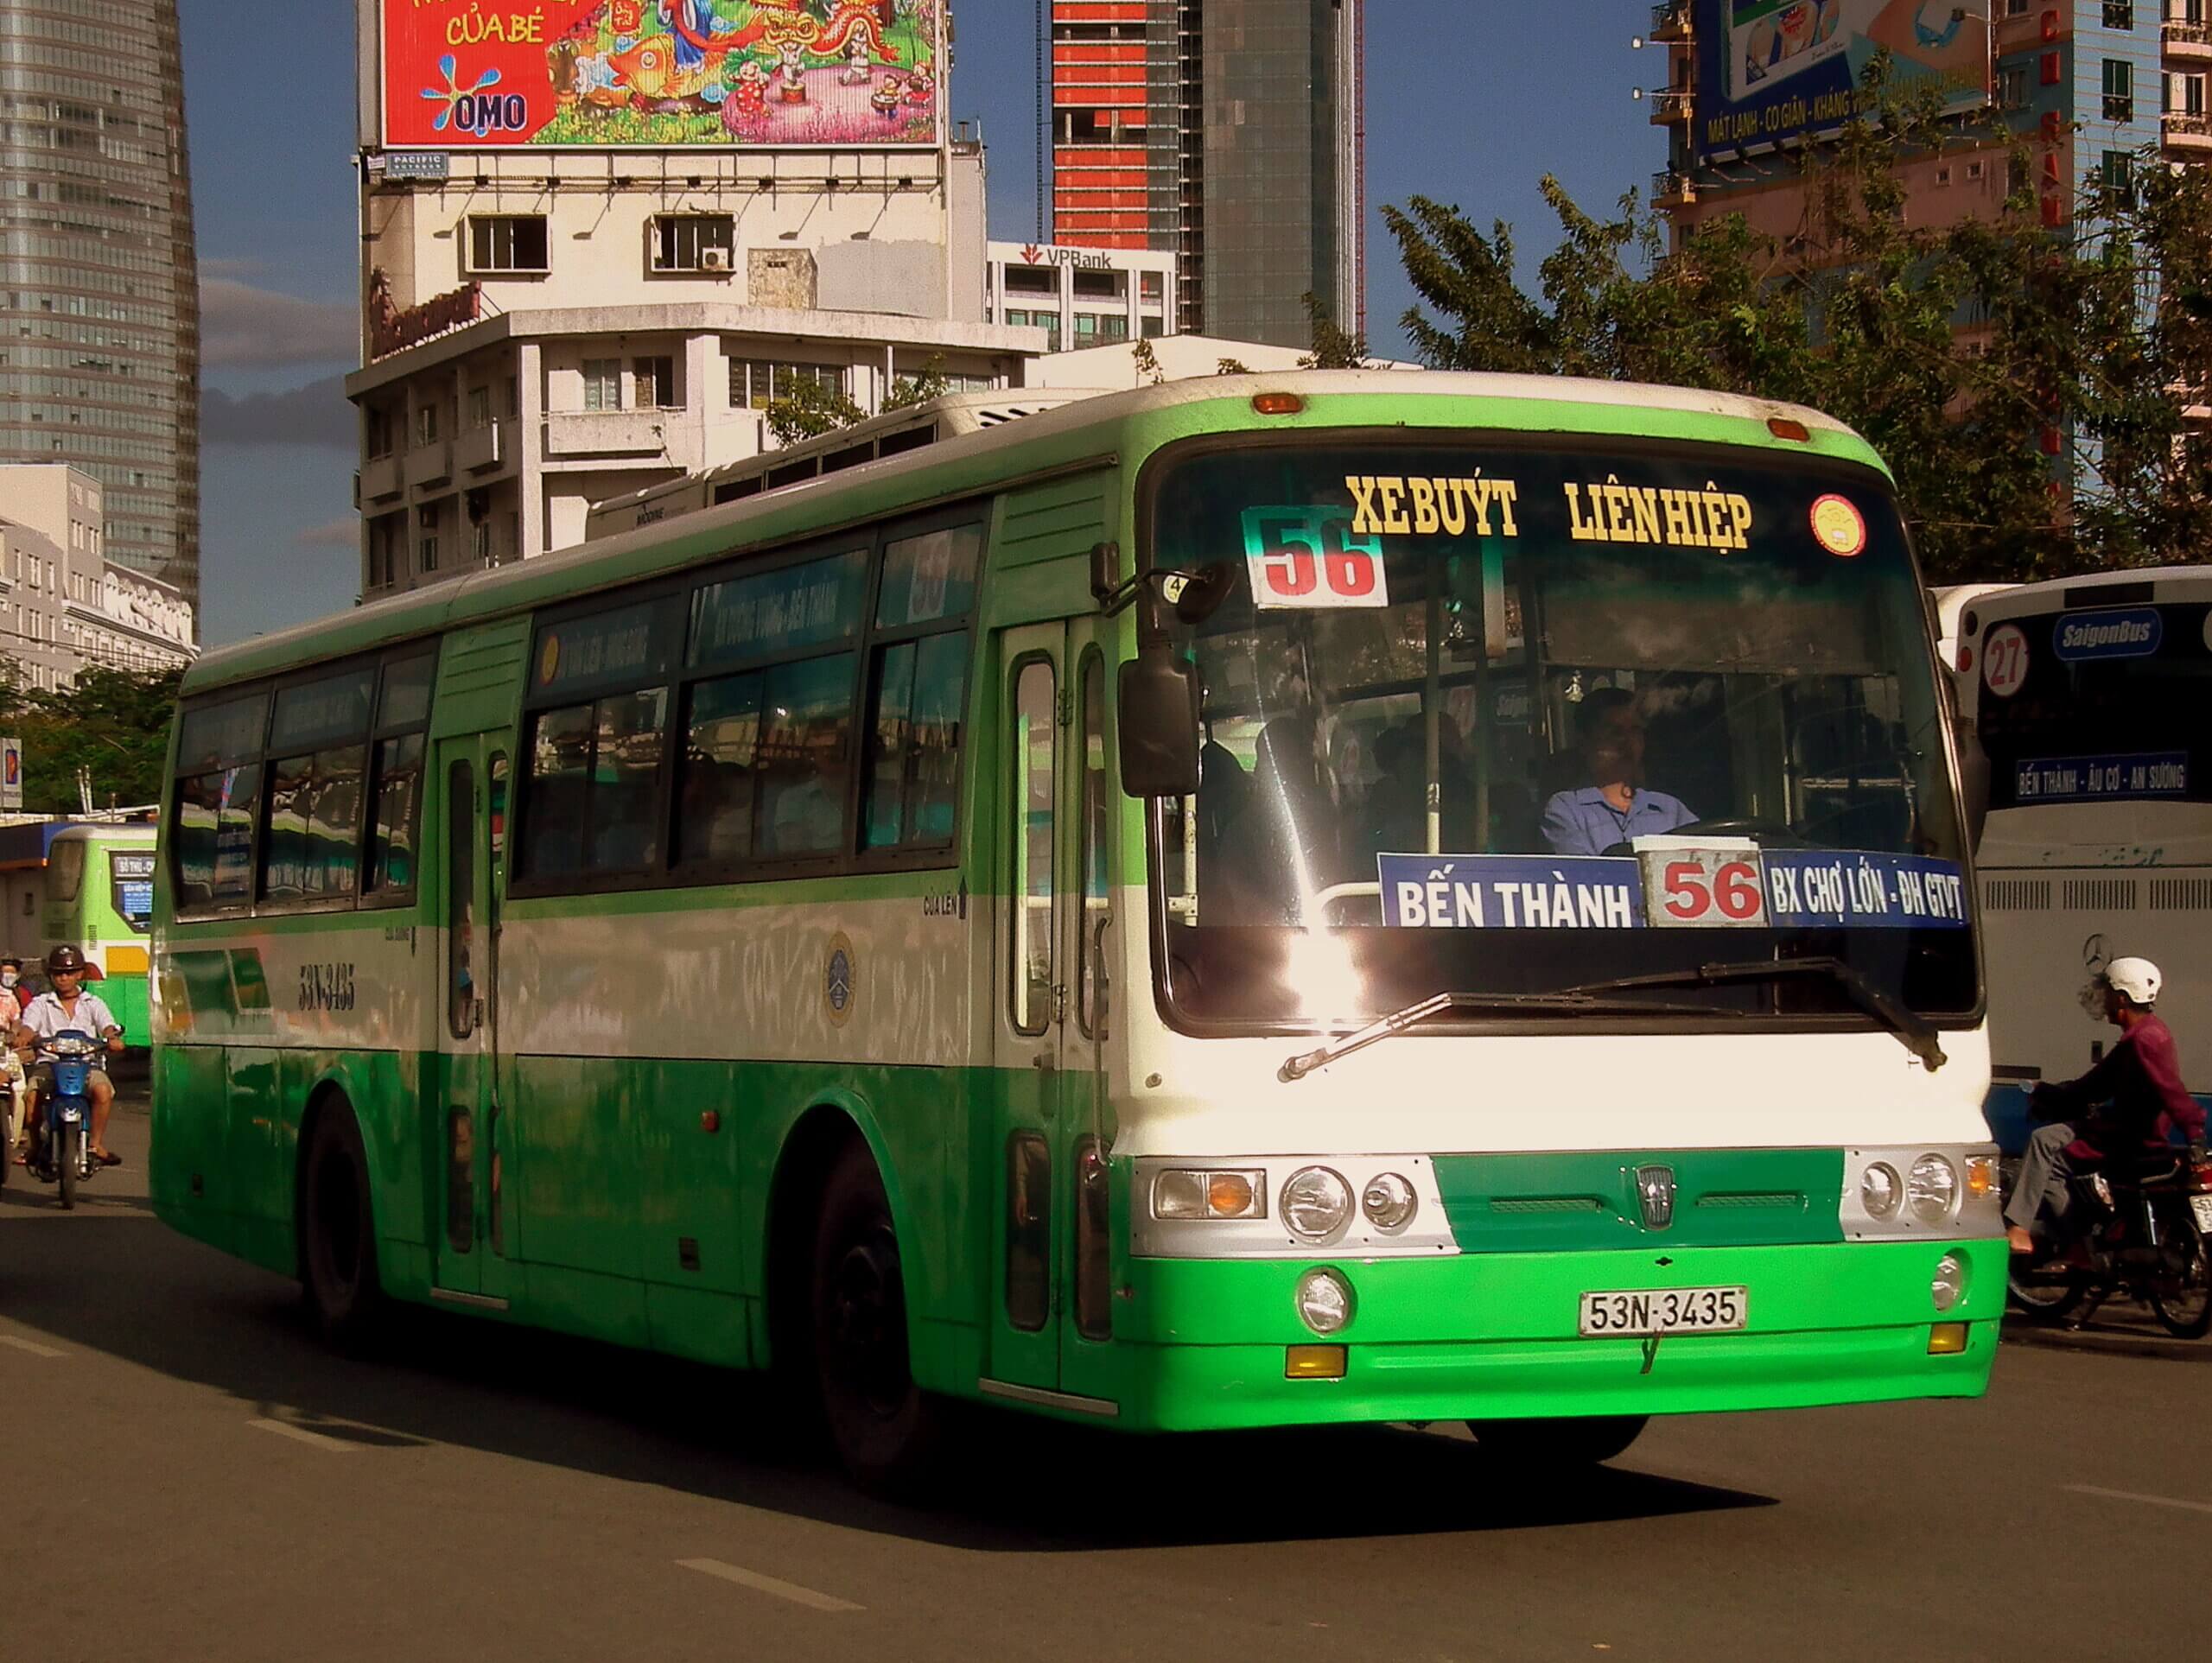 Vietnam Sleeper Buses: How to Use them Safely